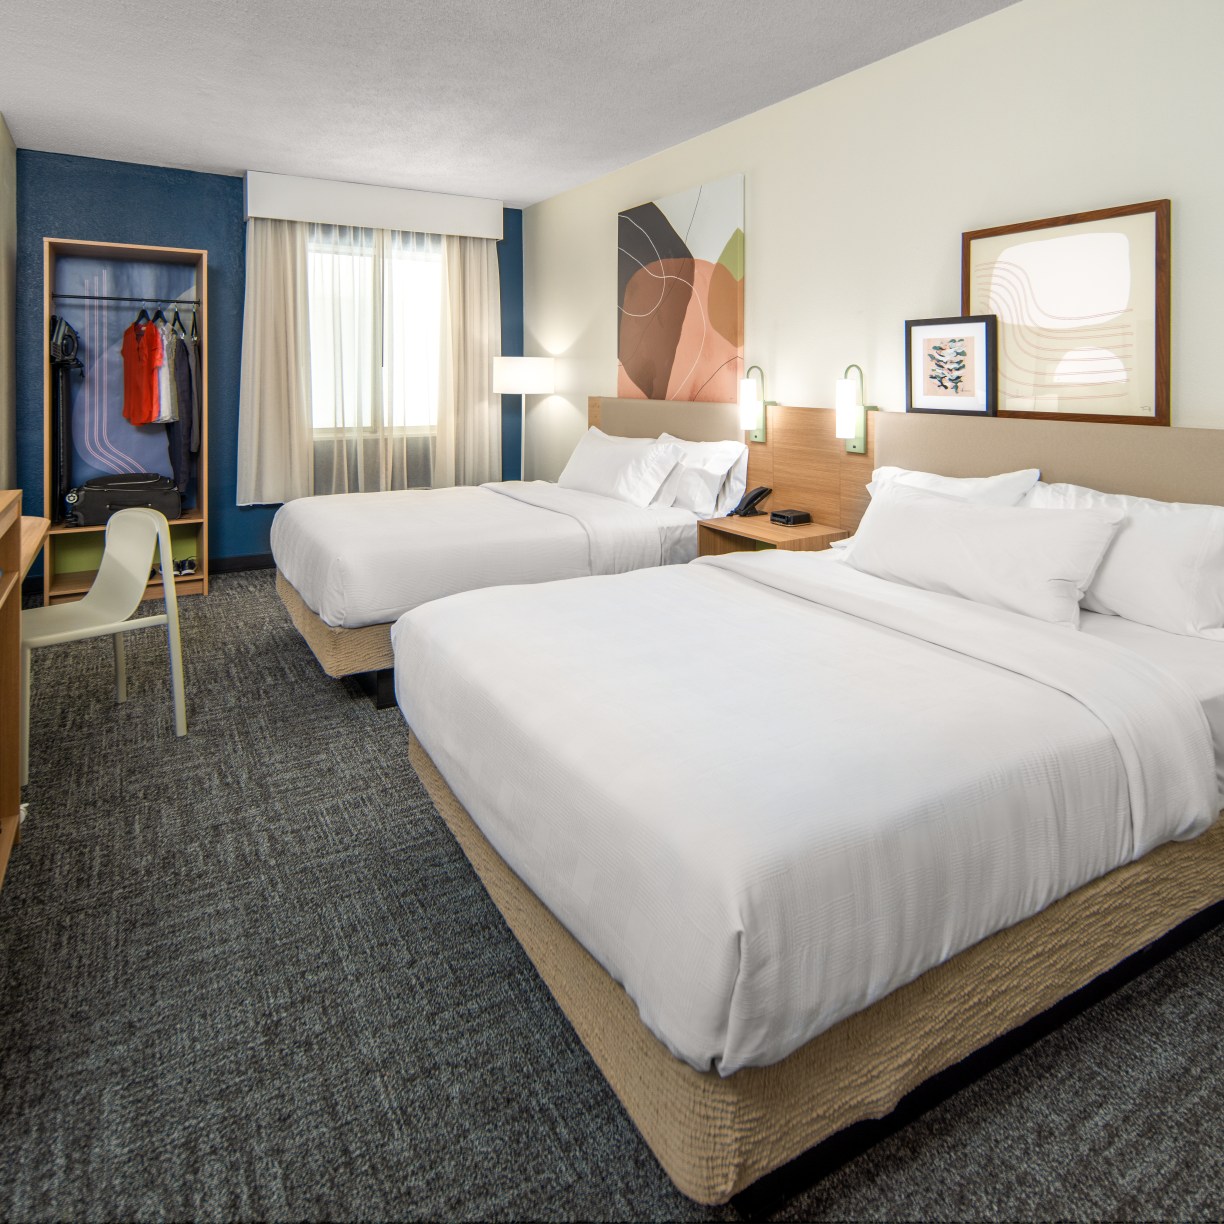 2 queen beds in guest room with closet and tv at Spark by Hilton a new hotel brand